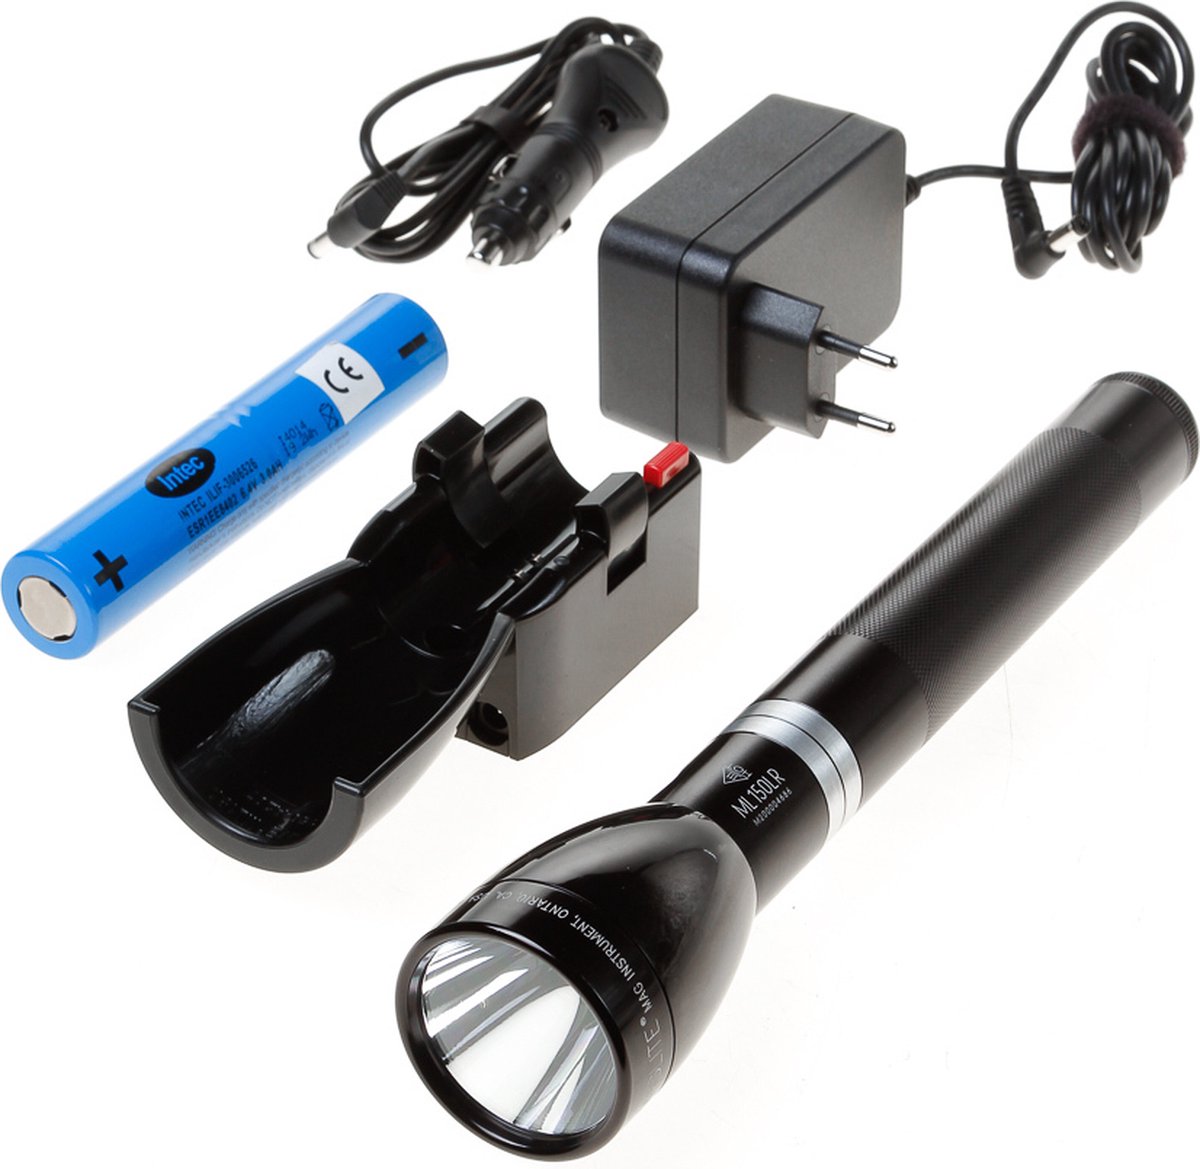 Lampe torche rechargeable Maglite ML150LR